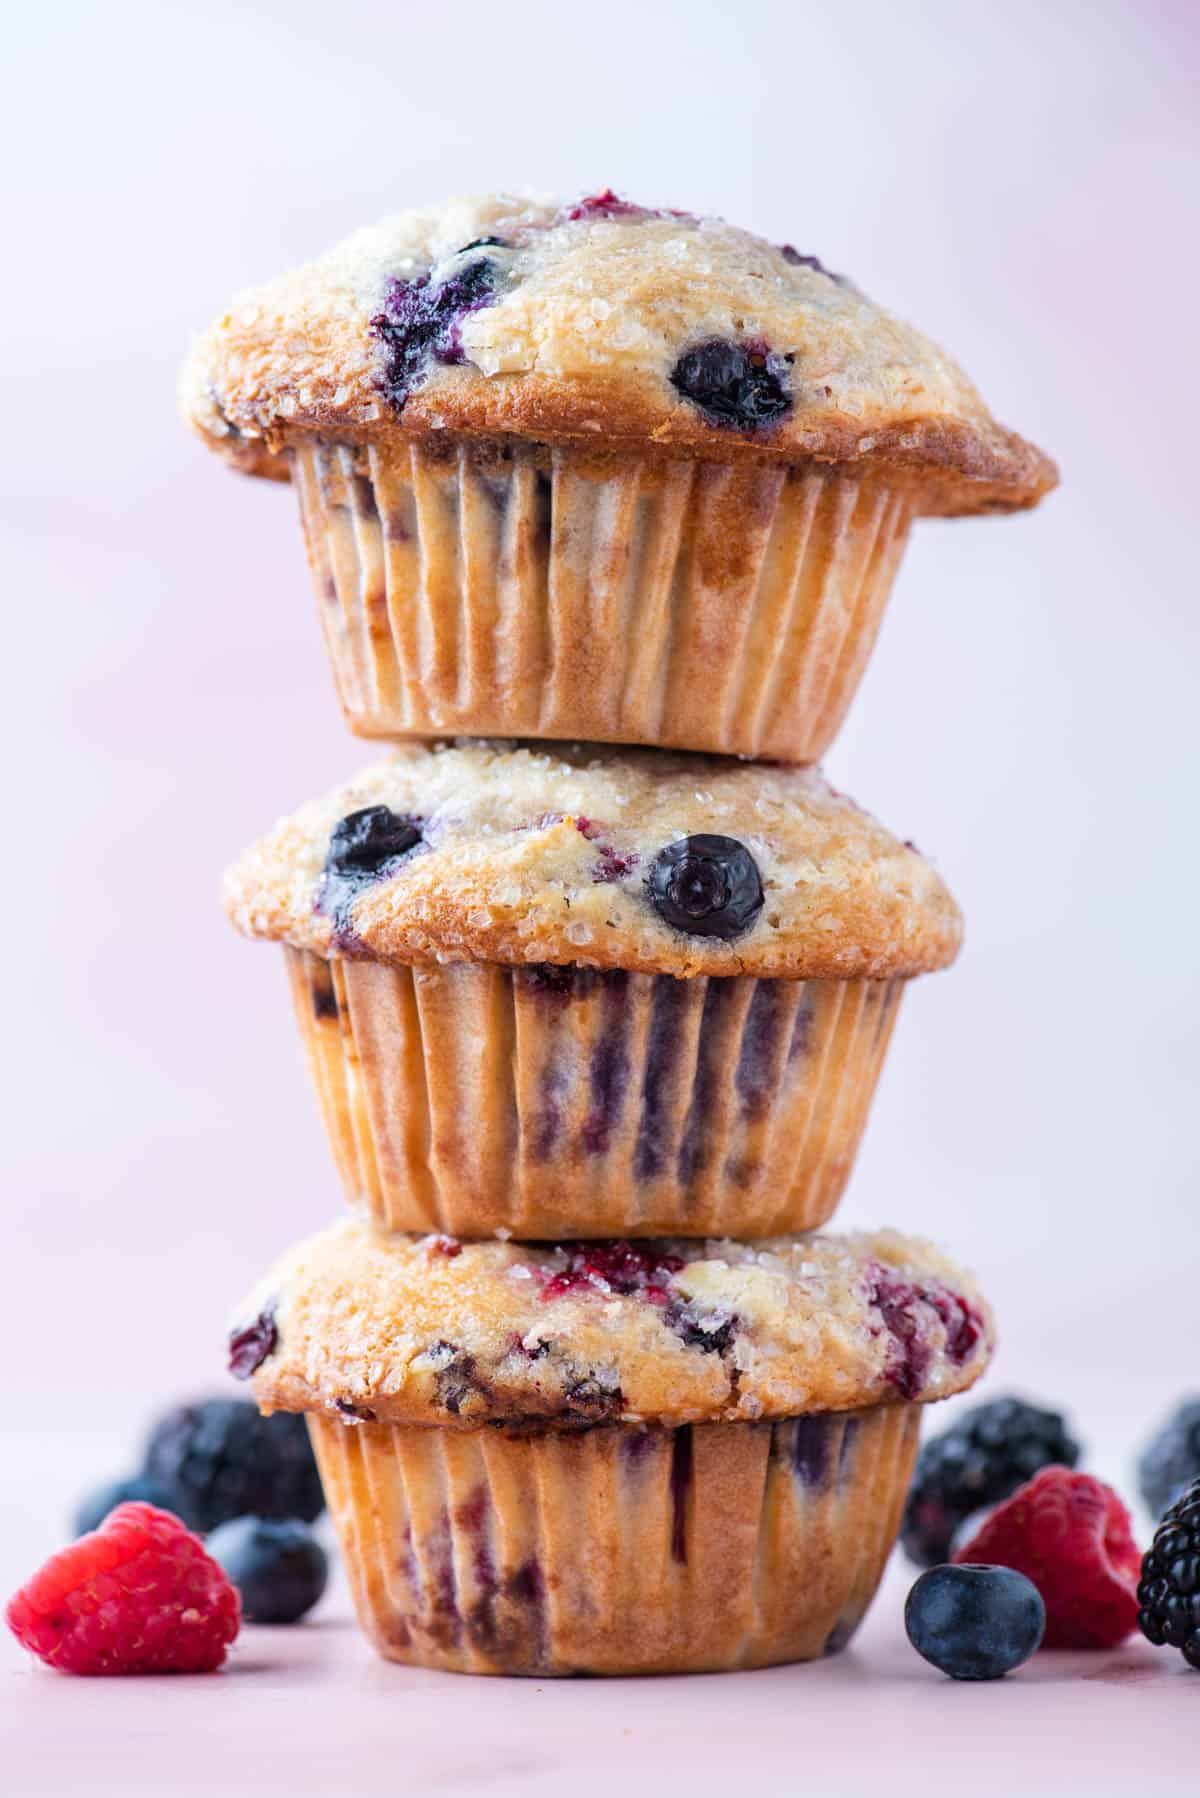 a stack of 3 triple berry cheesecake muffins sitting on a pink surface, surrounded by fresh blueberries, blackberries and raspberries